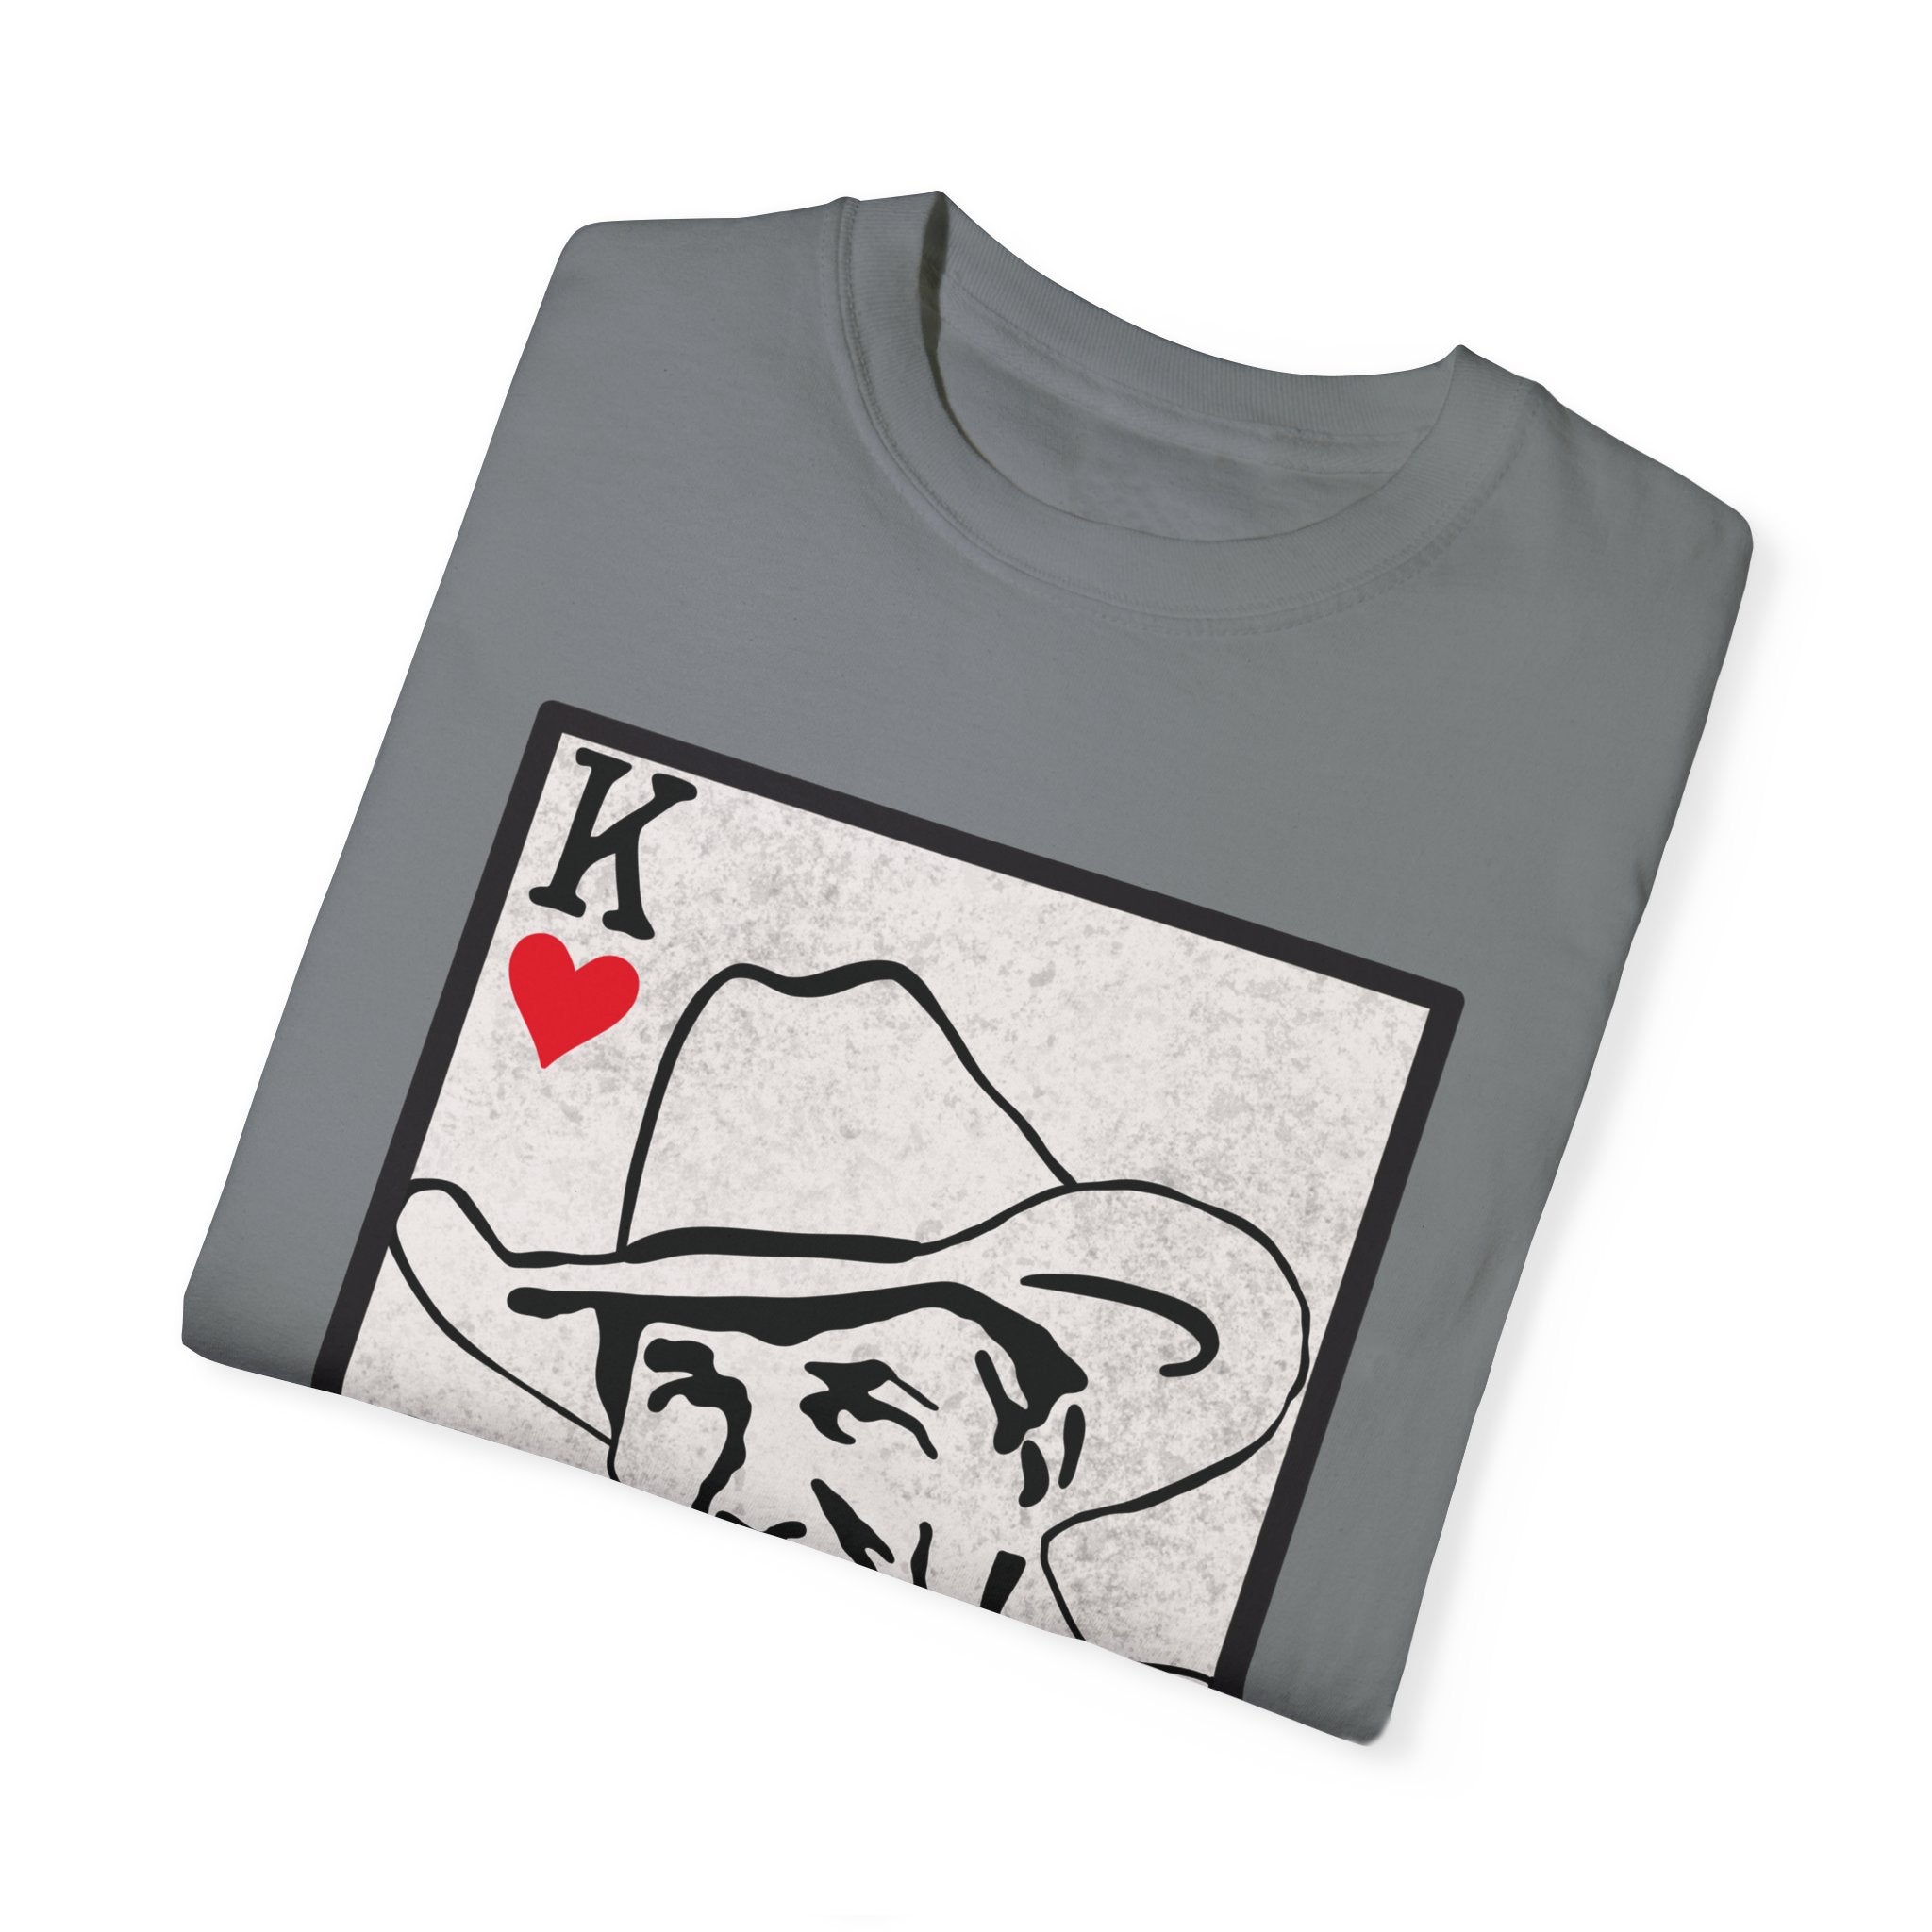 King of Hearts Comfort Colors Tee